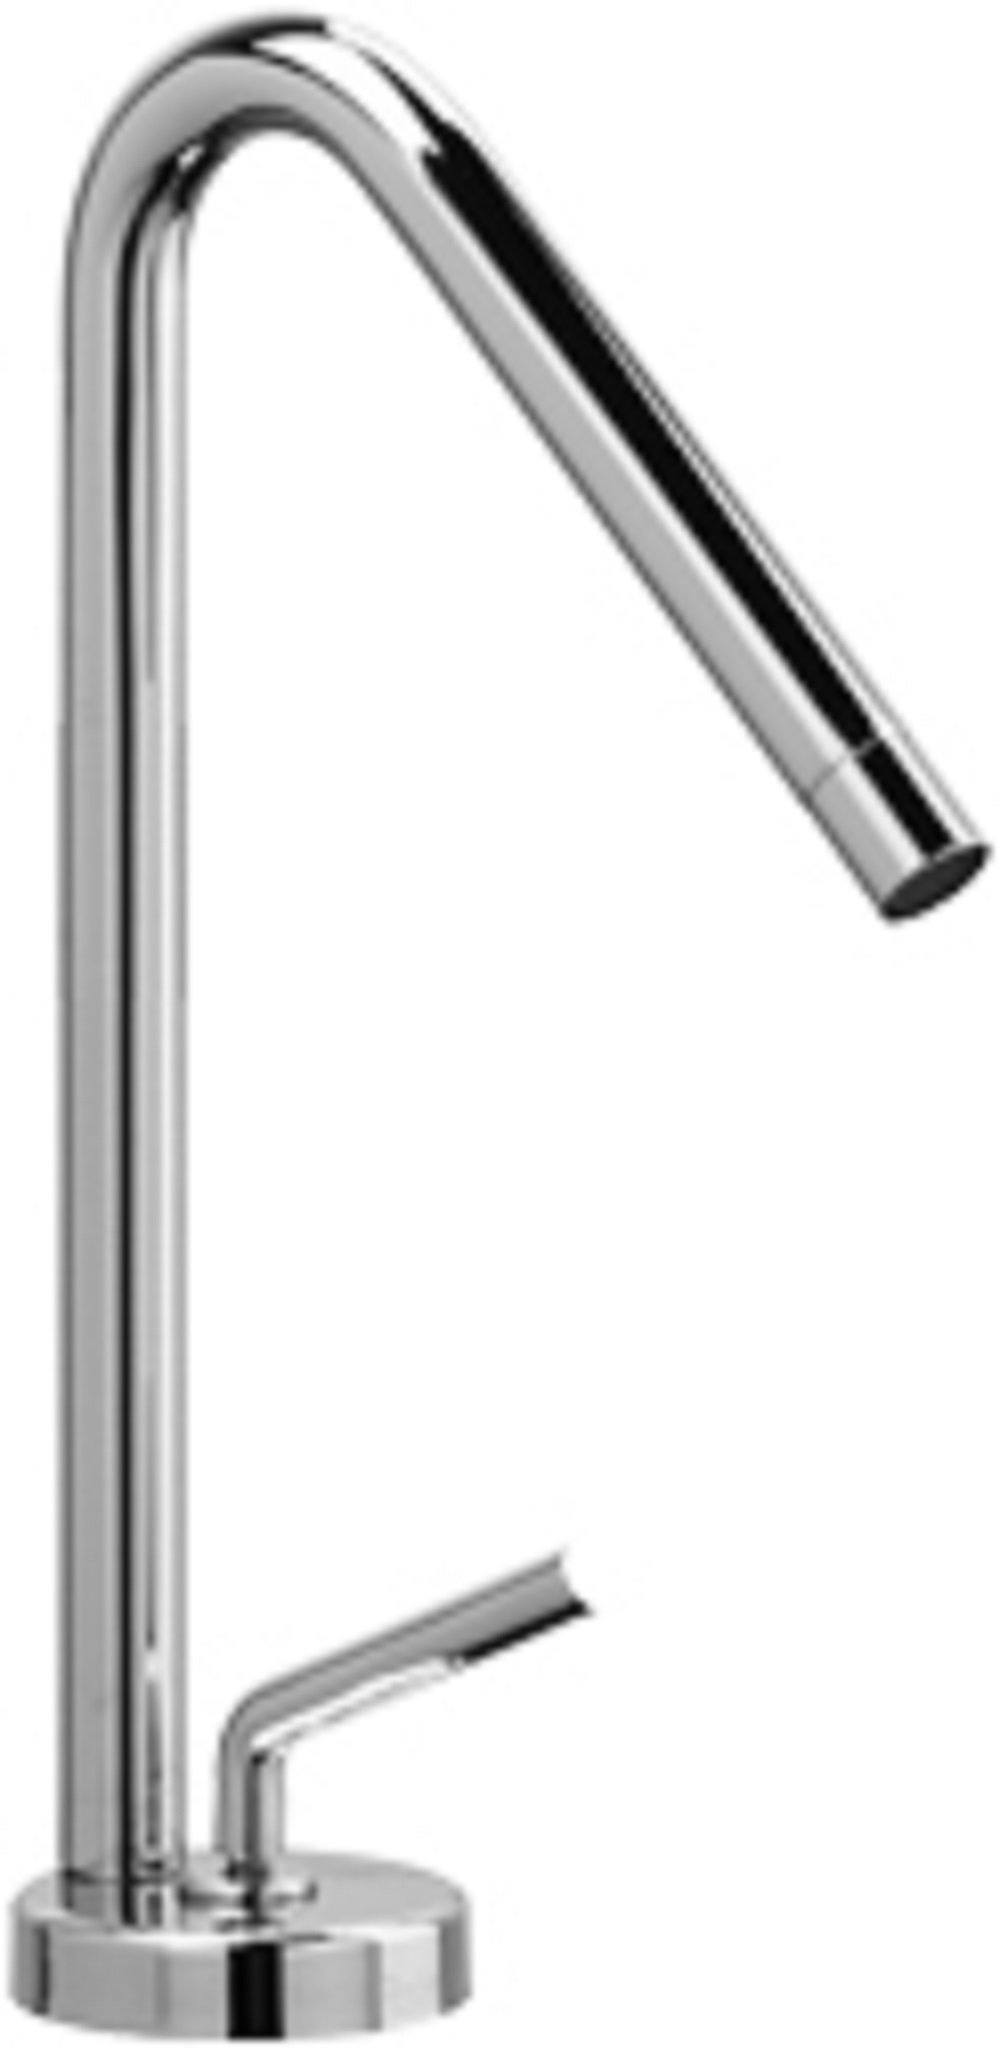 Latoscana Morellino Single Lever Handle Faucet In A Rotating Spout In A Chrome Finish touch on bathroom sink faucets Latoscana 